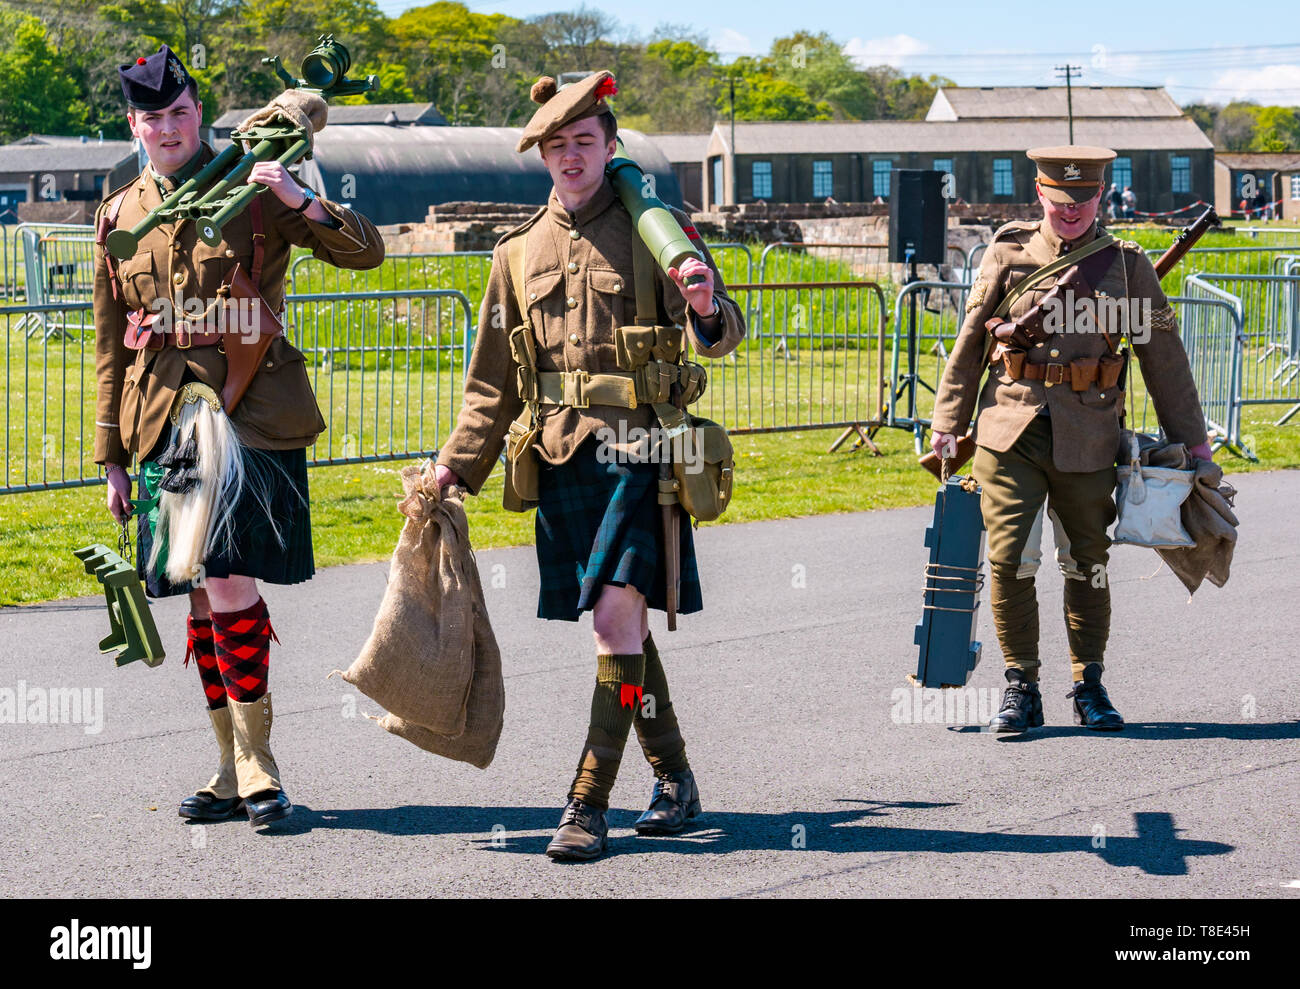 Museum of Flight, East Fortune, East Lothian, Scotland, UK 12th May, 2019. Wartime Experience: A family day out with all things related to the World Wars. A display by Scots in the Great War history group about military ordnance and firearms Stock Photo